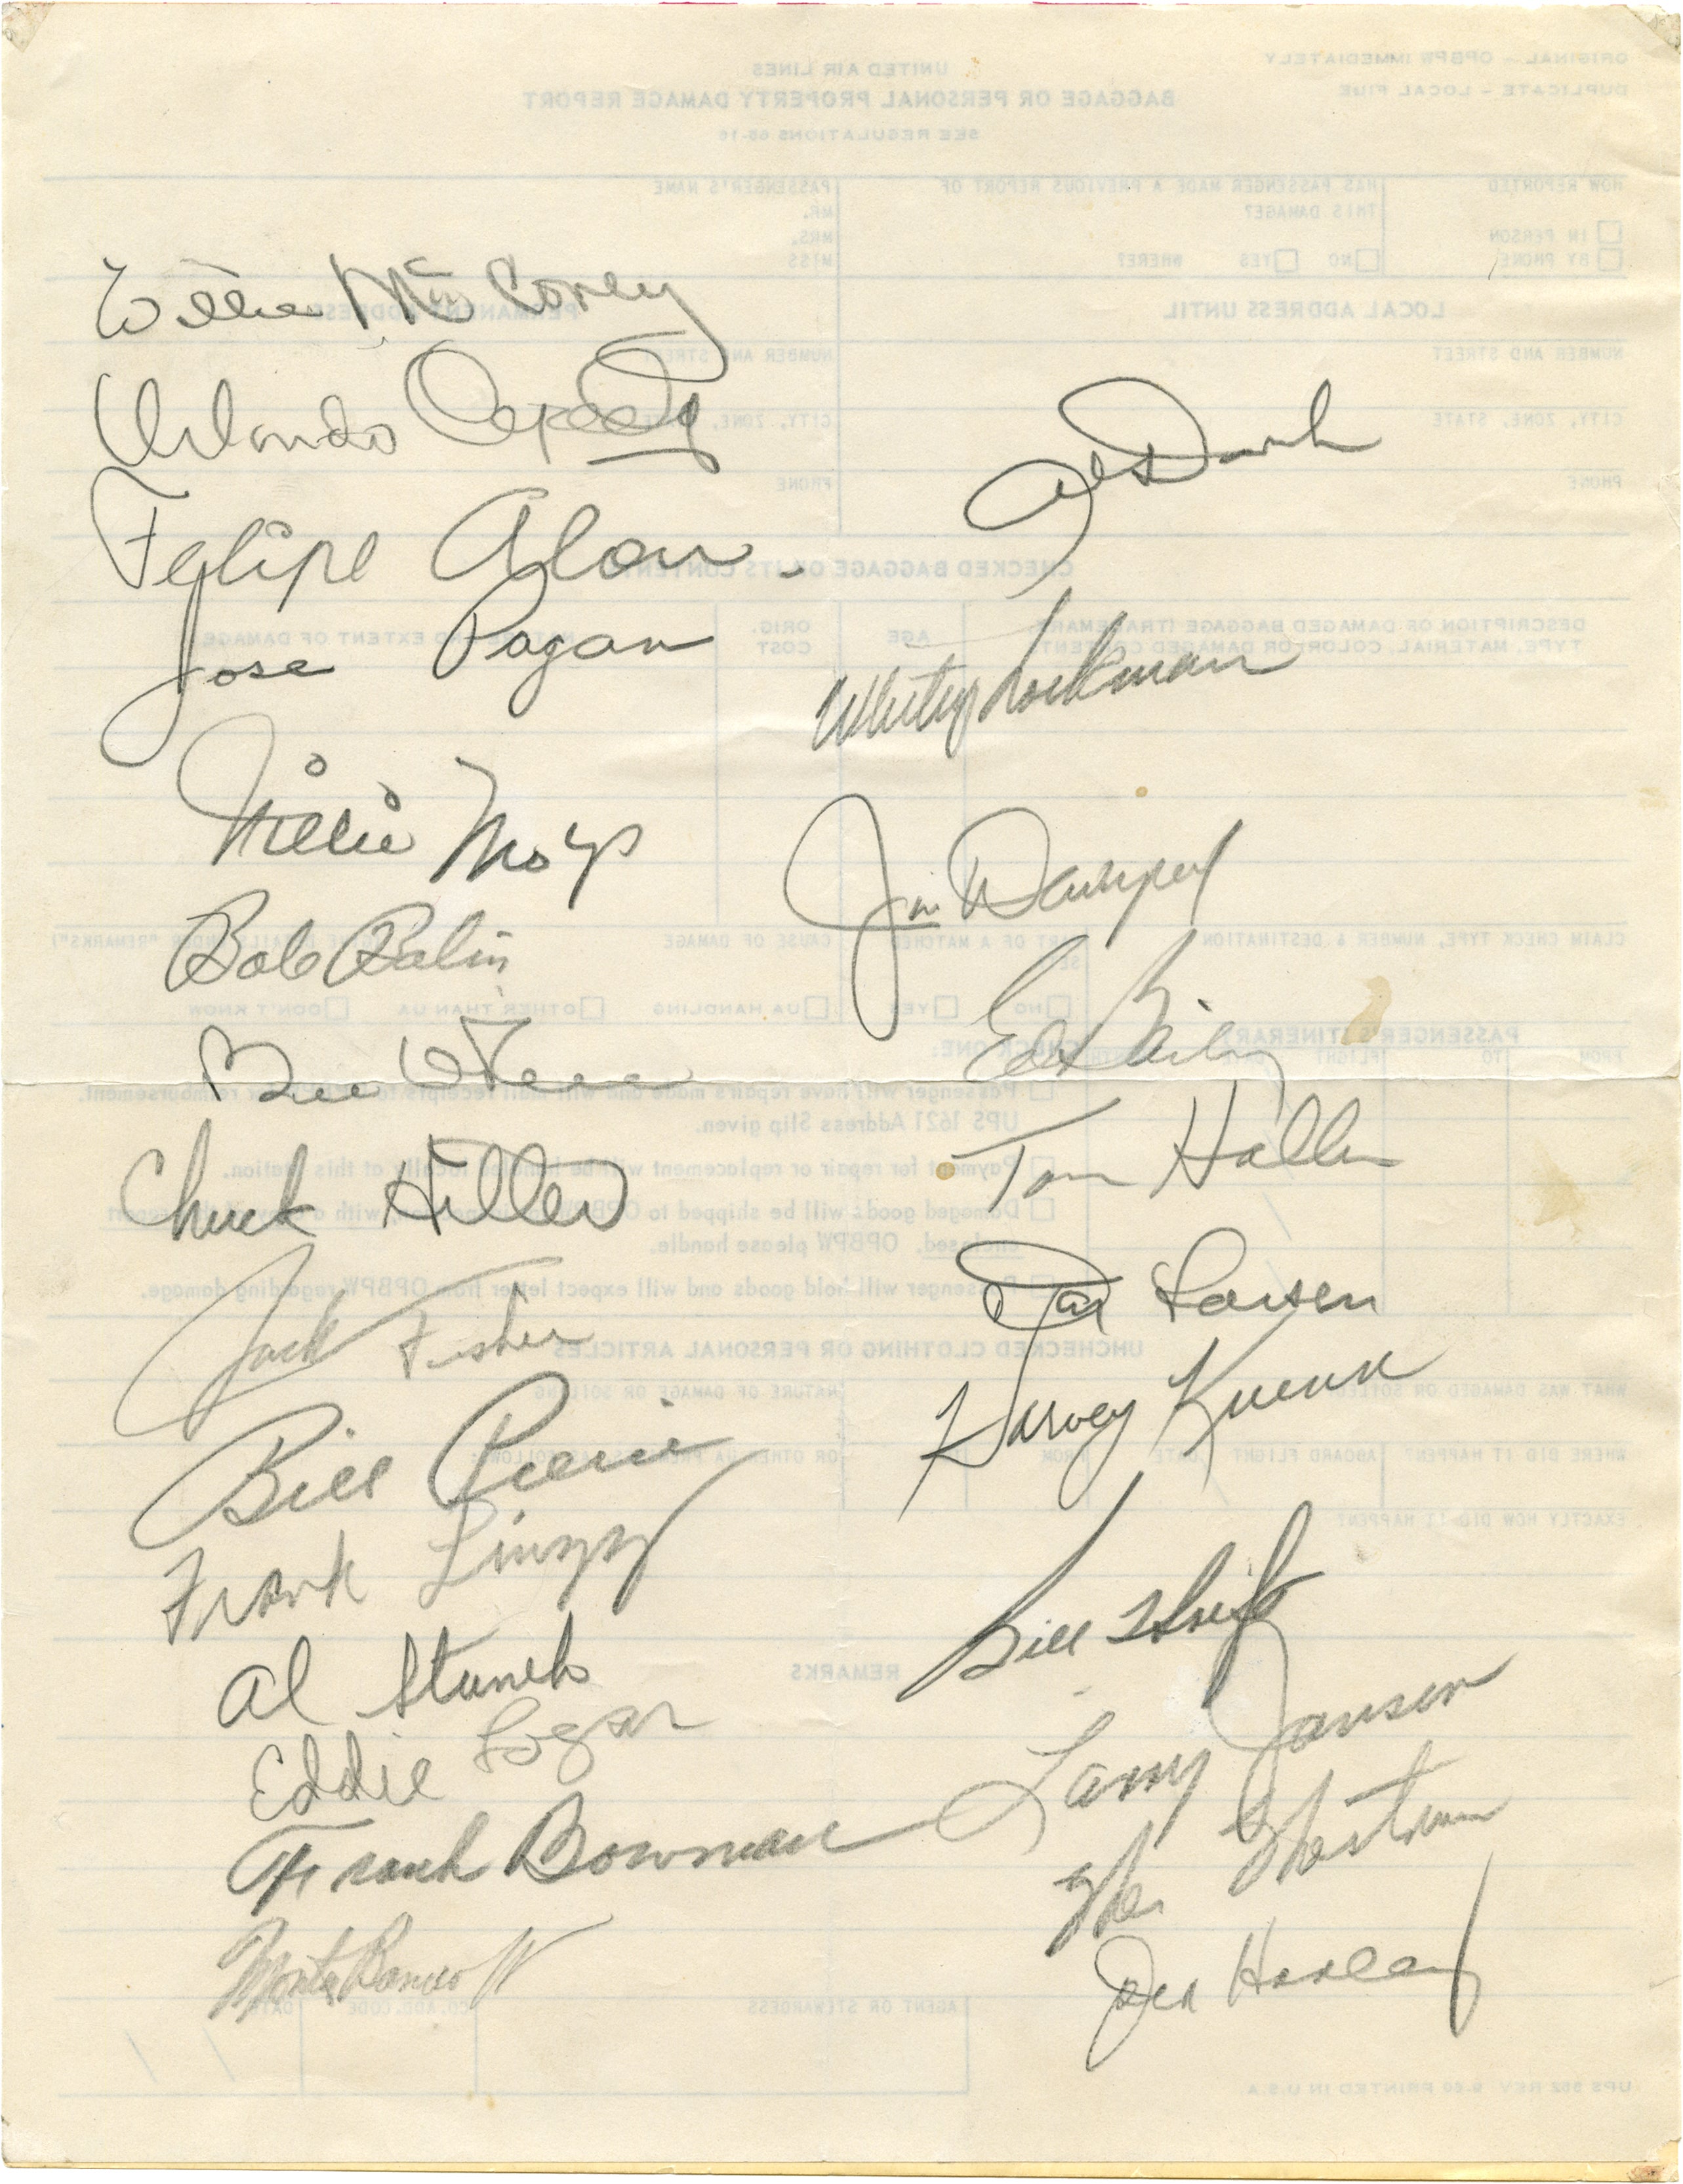 Reverse side of United Air Lines baggage damage report form autographed by San Francisco Giants team members